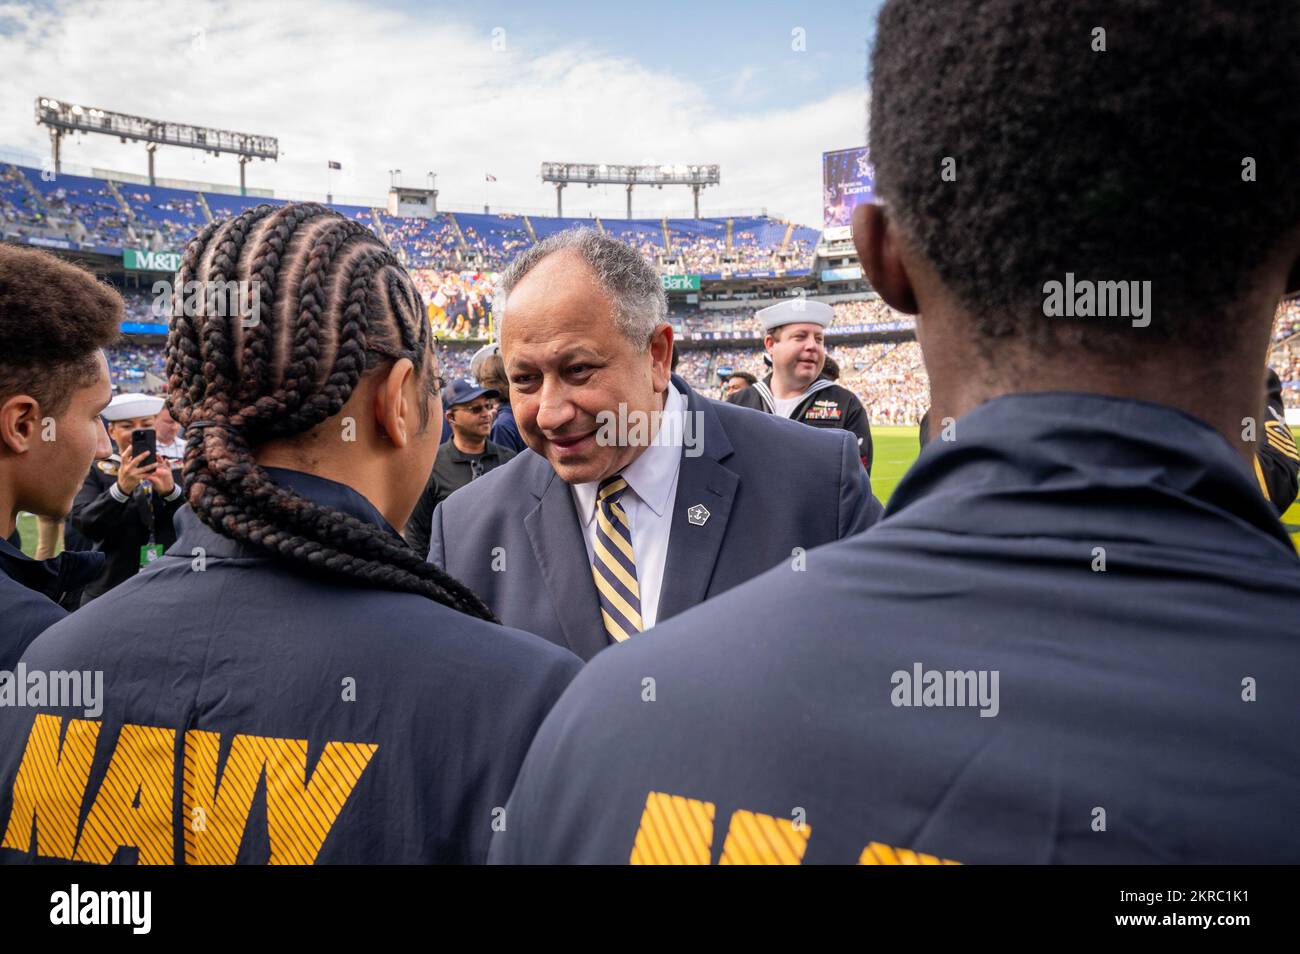 221112-N-WF272-2476 BALTIMORE (Nov. 12, 2022) U.S. Secretary of the Navy Carlos Del Toro meets future U.S. Navy Sailors, recruited by Navy Talent Acquisition Group Philadelphia, during the Navy-Notre Dame football game held at M&T Bank Stadium in Baltimore, Nov. 12, 2022. The game marked the 23rd time the city of Baltimore has hosted a Navy-Notre Dame game and the first since 2008. NTAG Philadelphia encompasses regions of Pennsylvania, New Jersey, Delaware, Maryland and West Virginia, providing recruiting services from more than 30 talent acquisition sites with the overall goal of attracting t Stock Photo